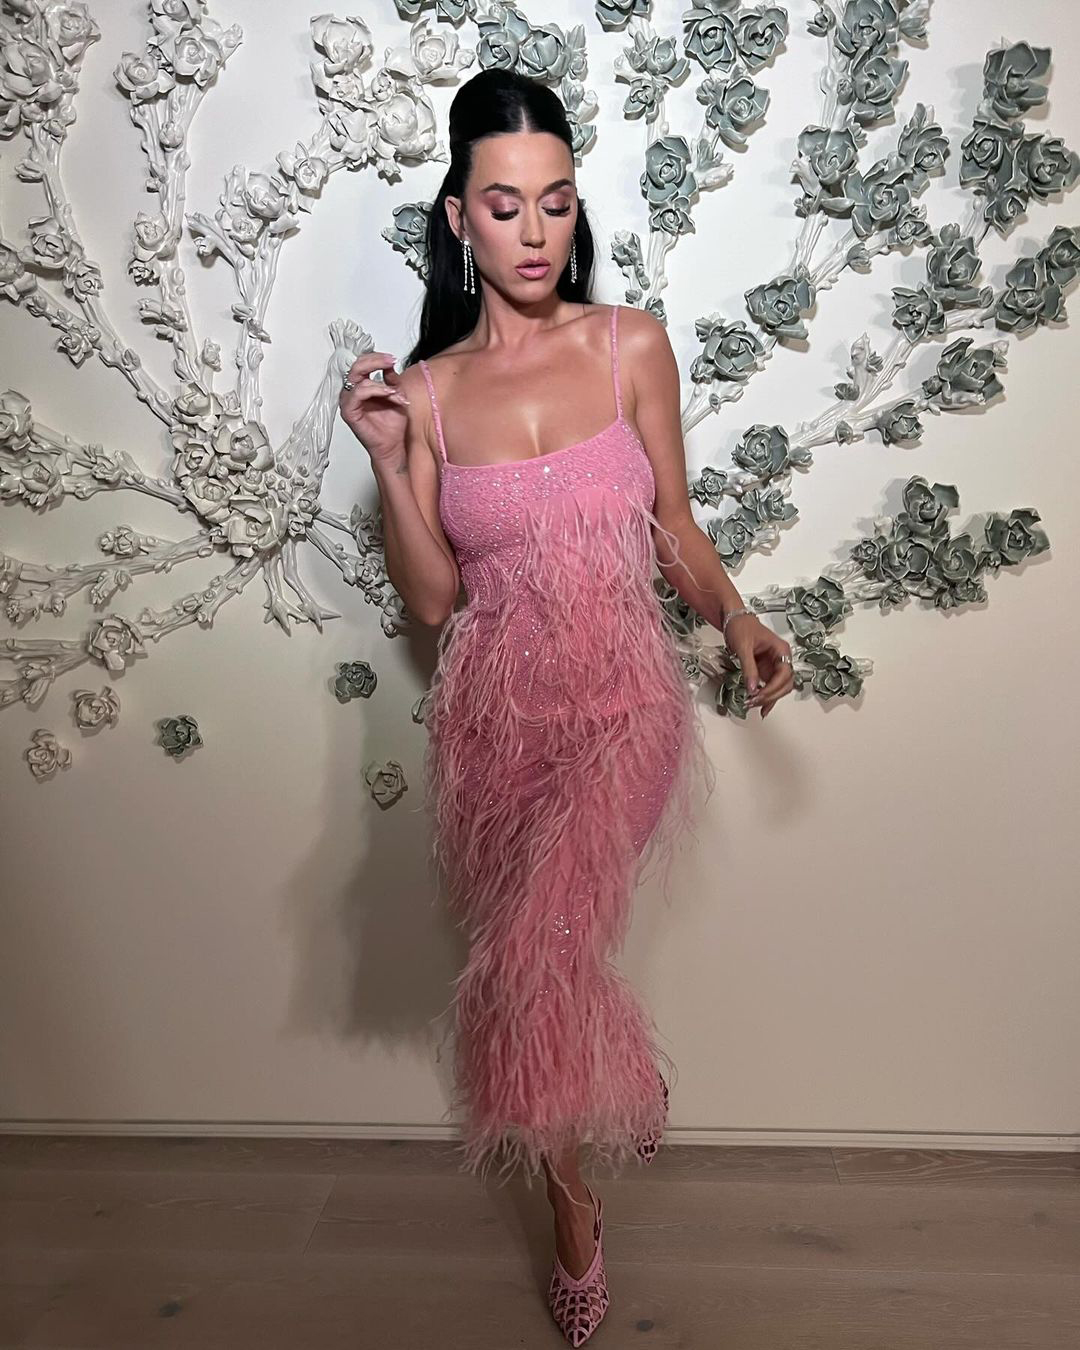 Above, Katy Perry stunned in a pink dress in a snap shared on her Instagram profile